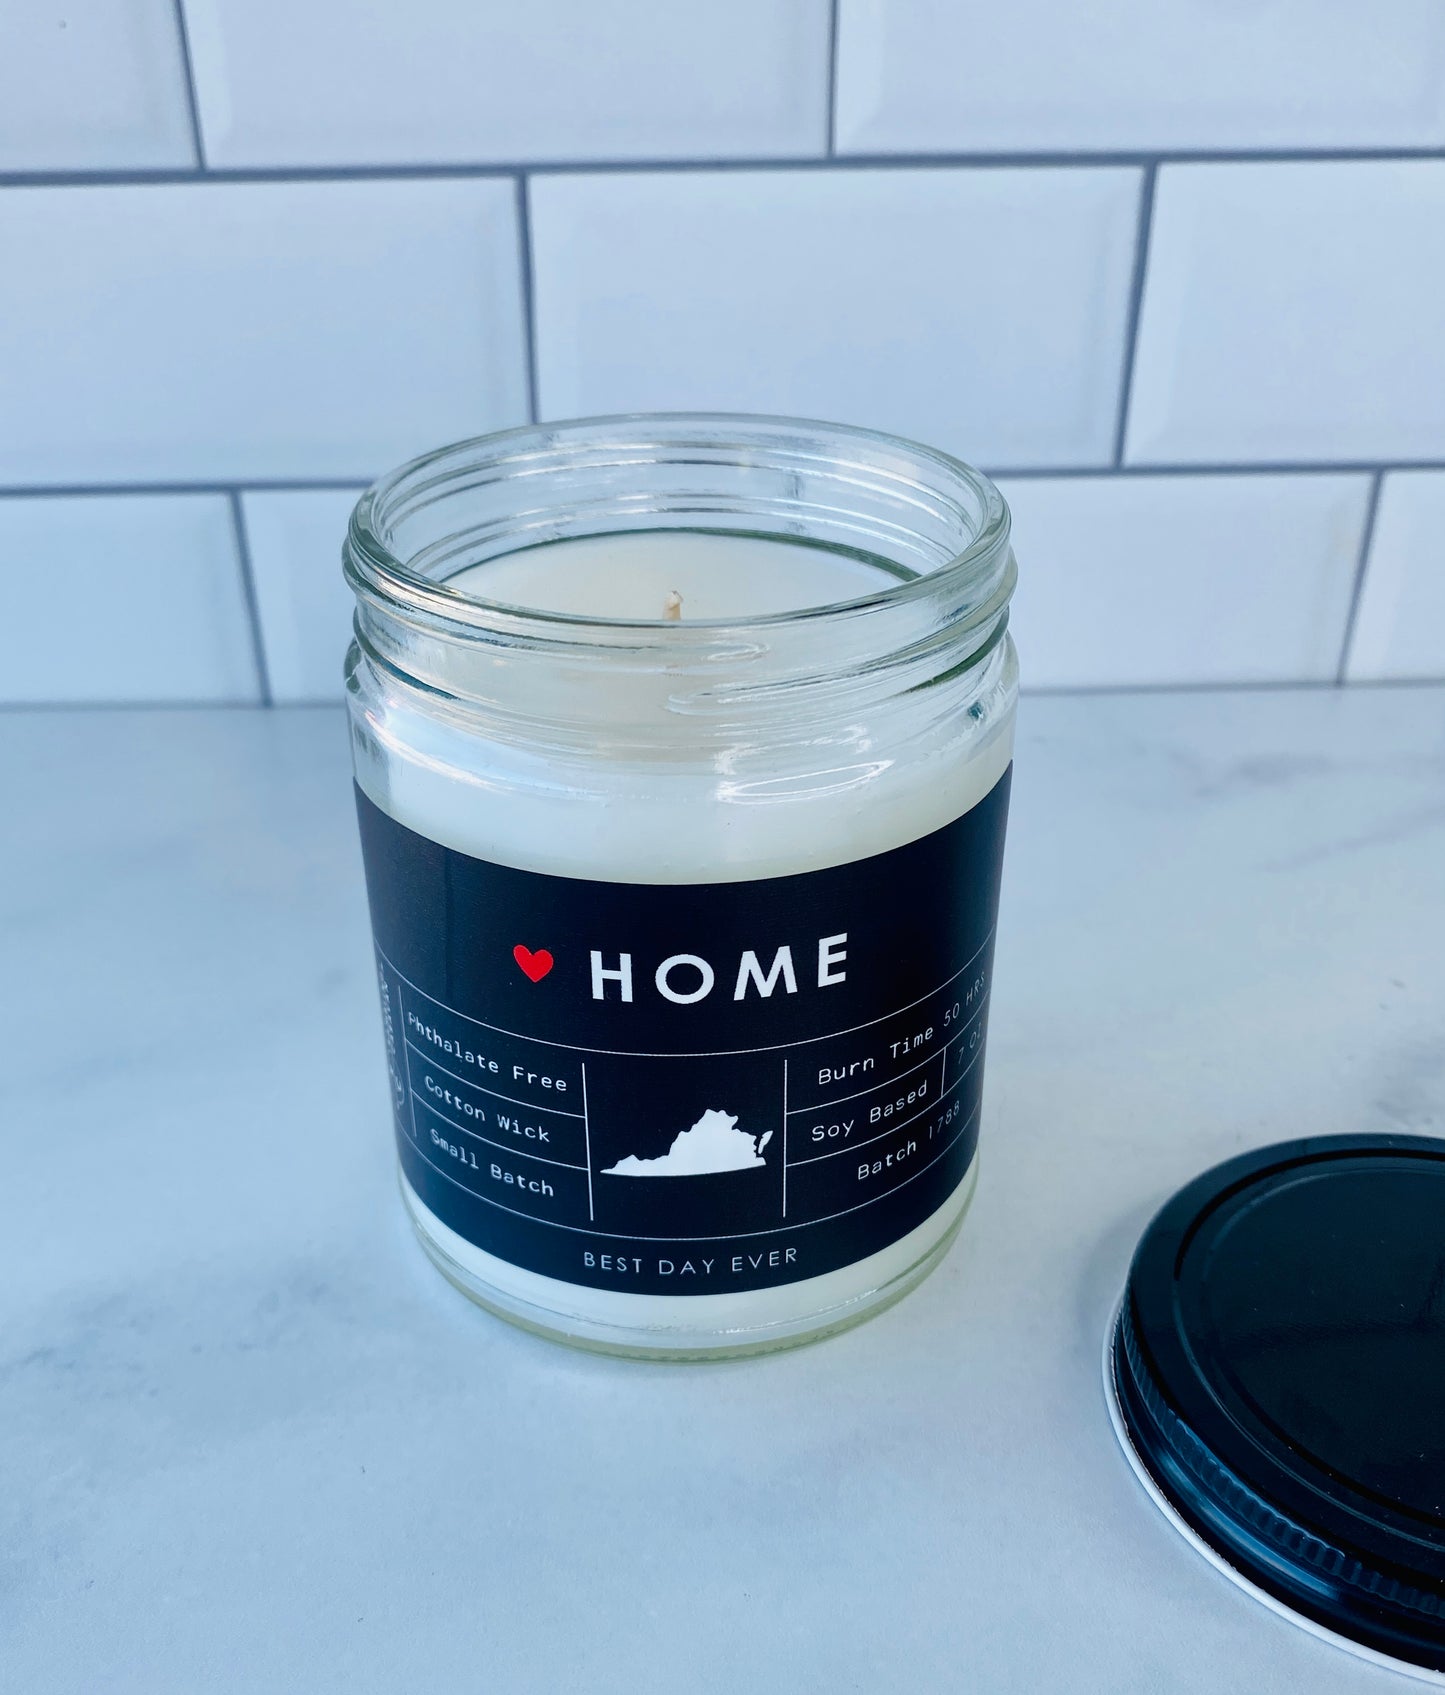 Home (Virginia) Candle